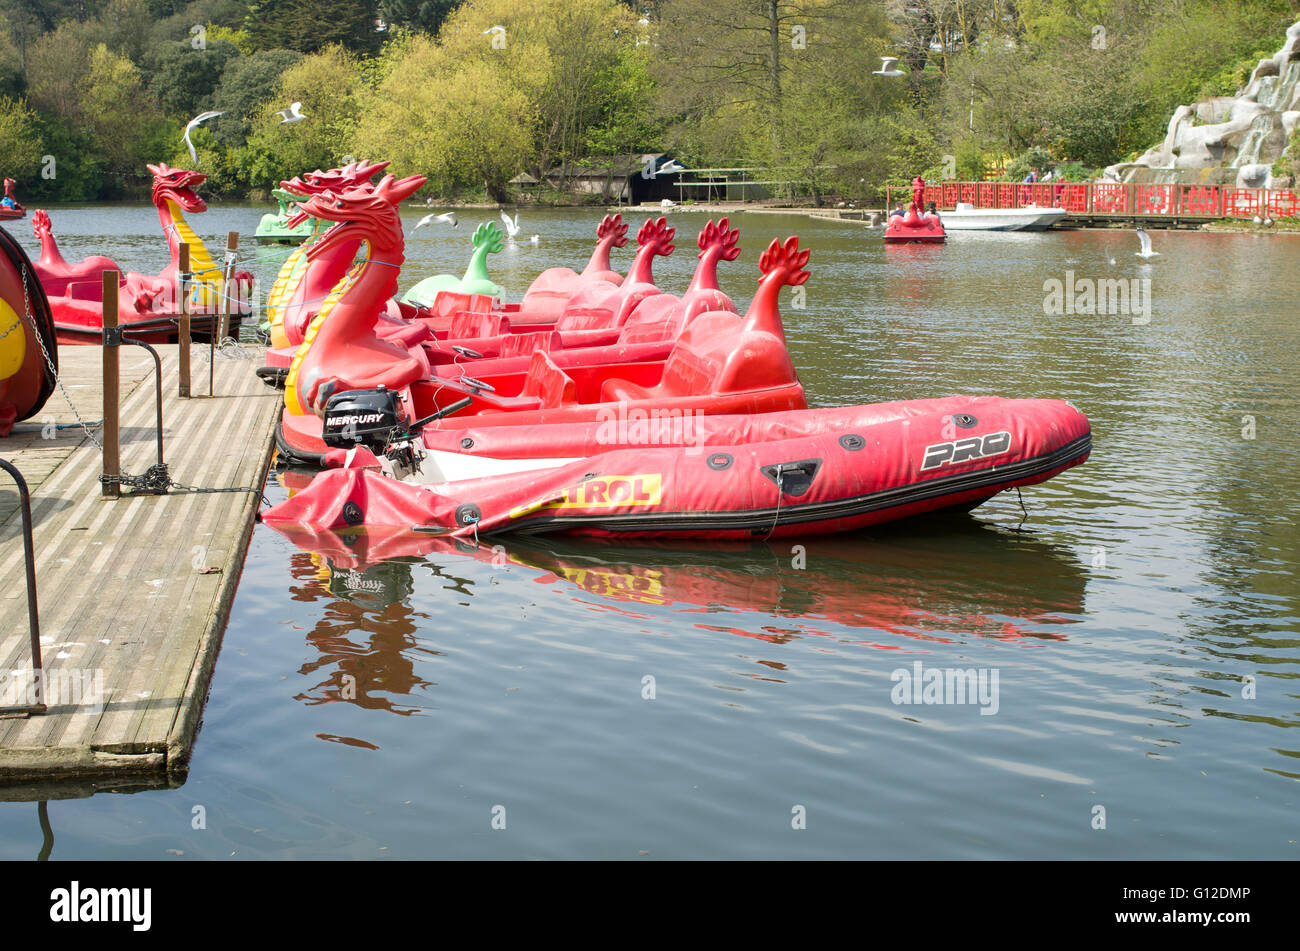 Part deflated safety boat Stock Photo